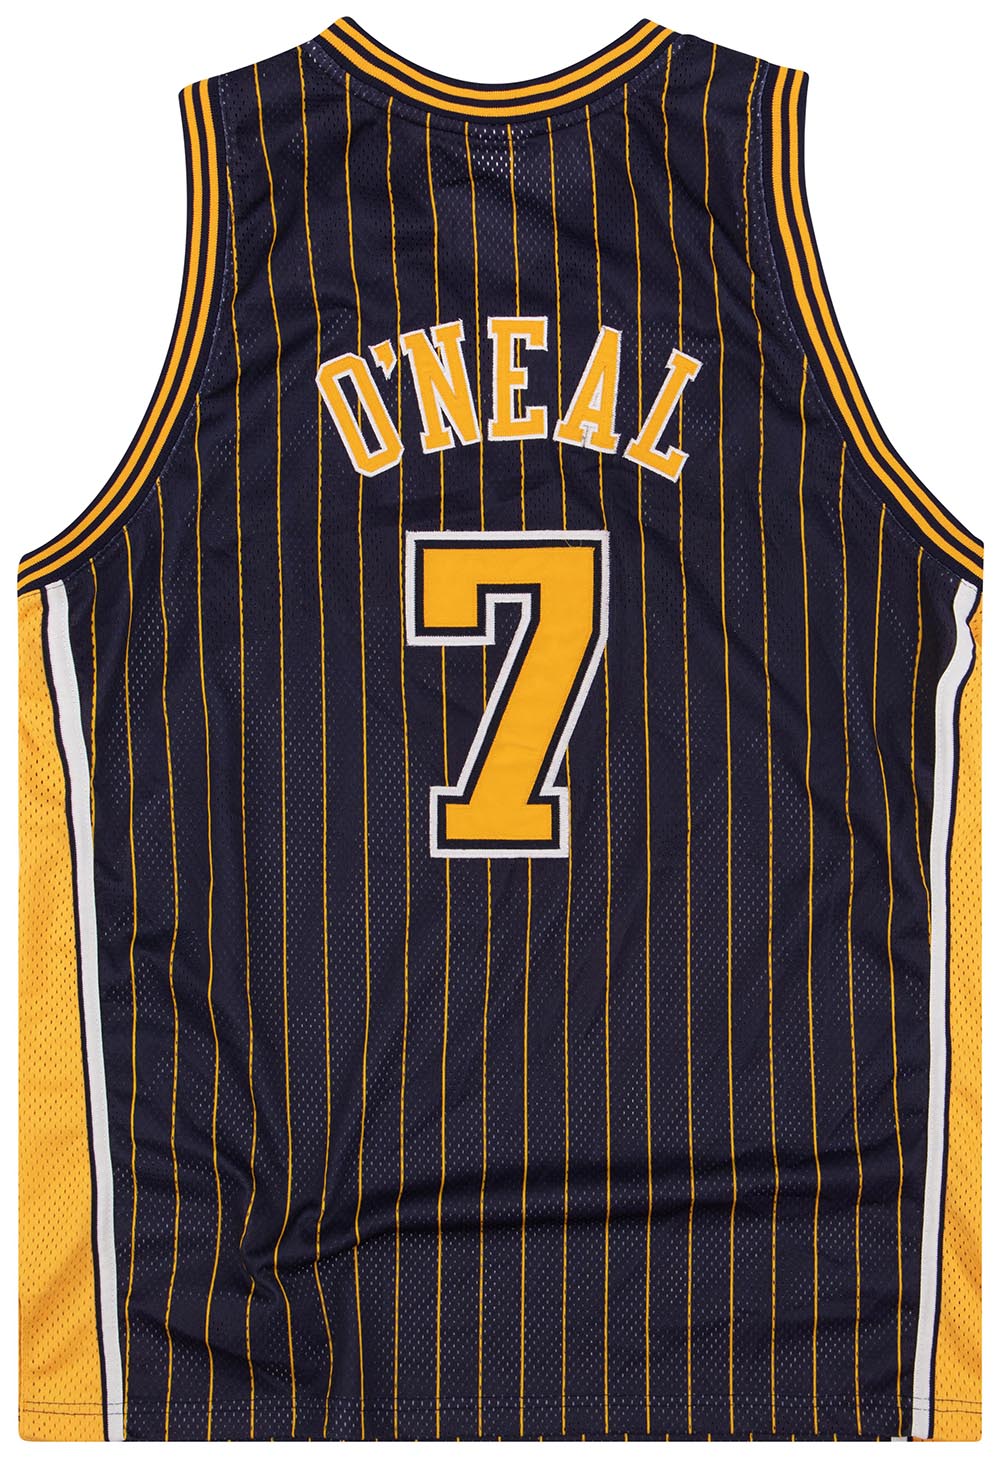 2001-05 AUTHENTIC INDIANA PACERS O'NEAL #7 REEBOK JERSEY (AWAY) L